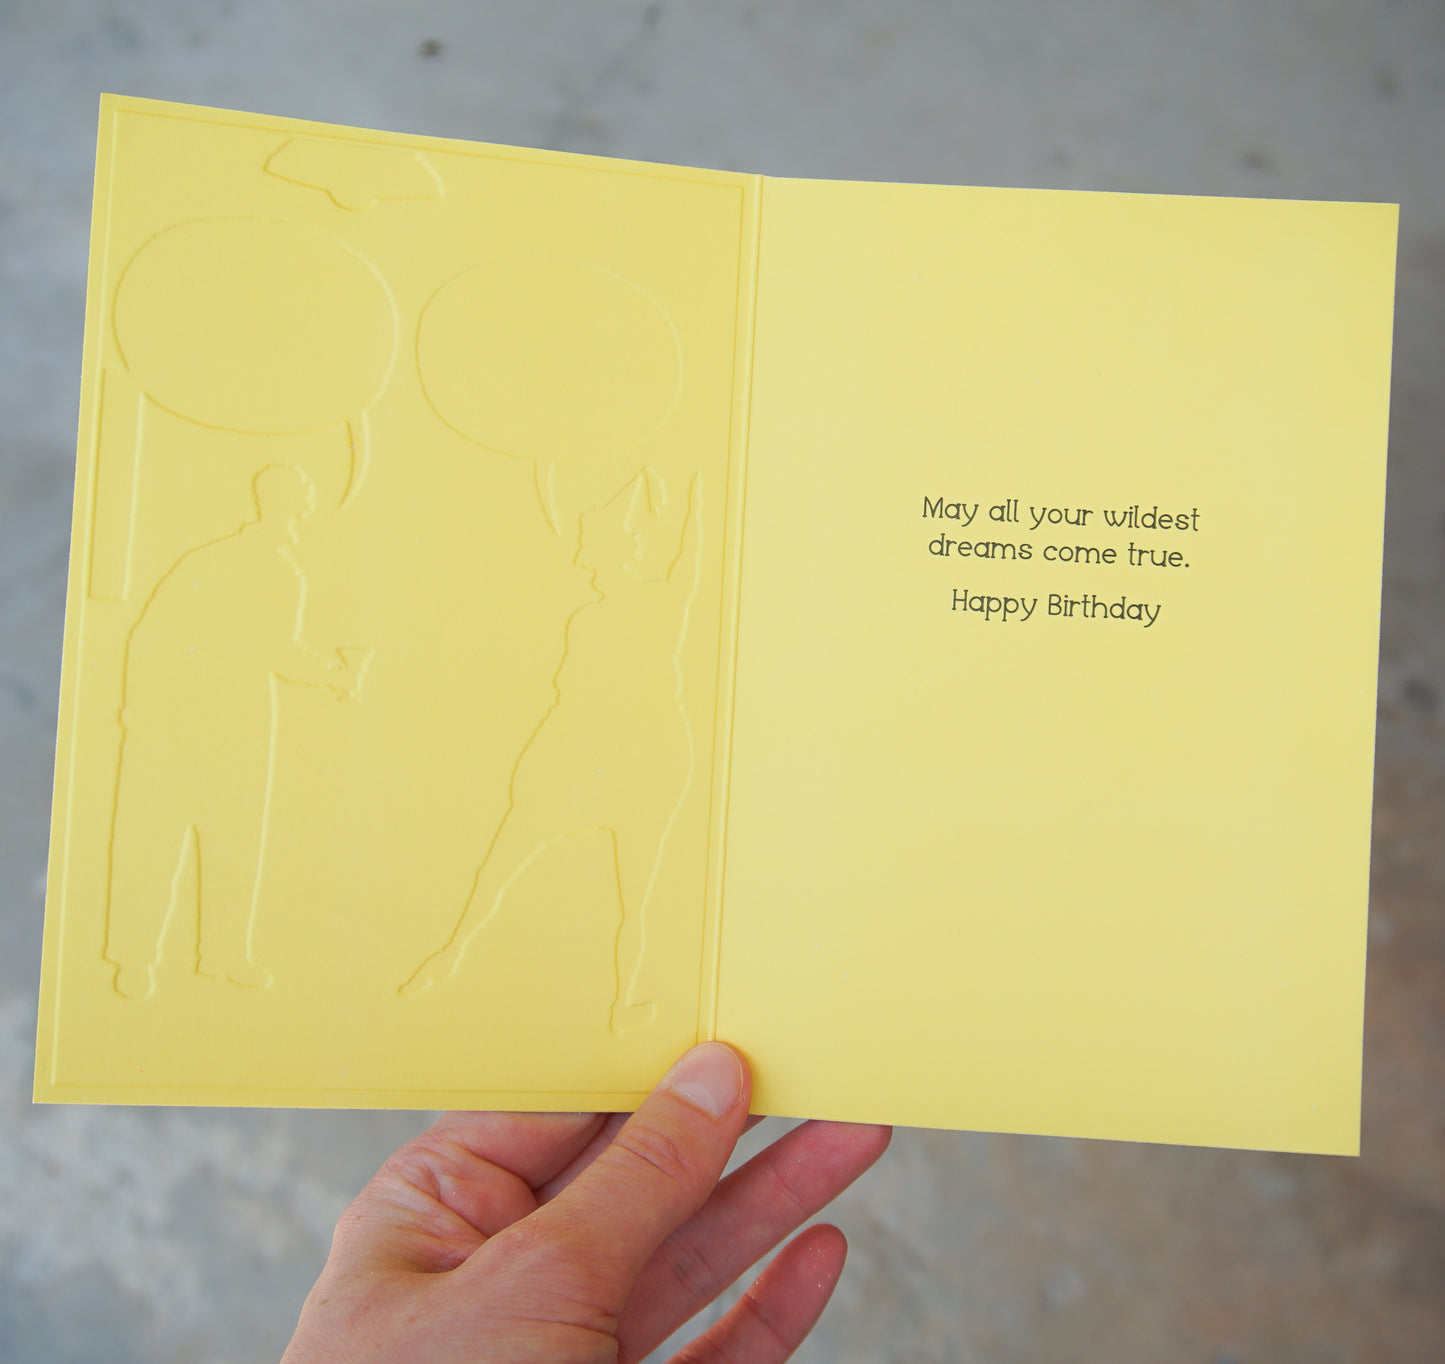 Leave The Diaper on Birthday Card Eric Decetis 30422 Pictura USA – Cardmore